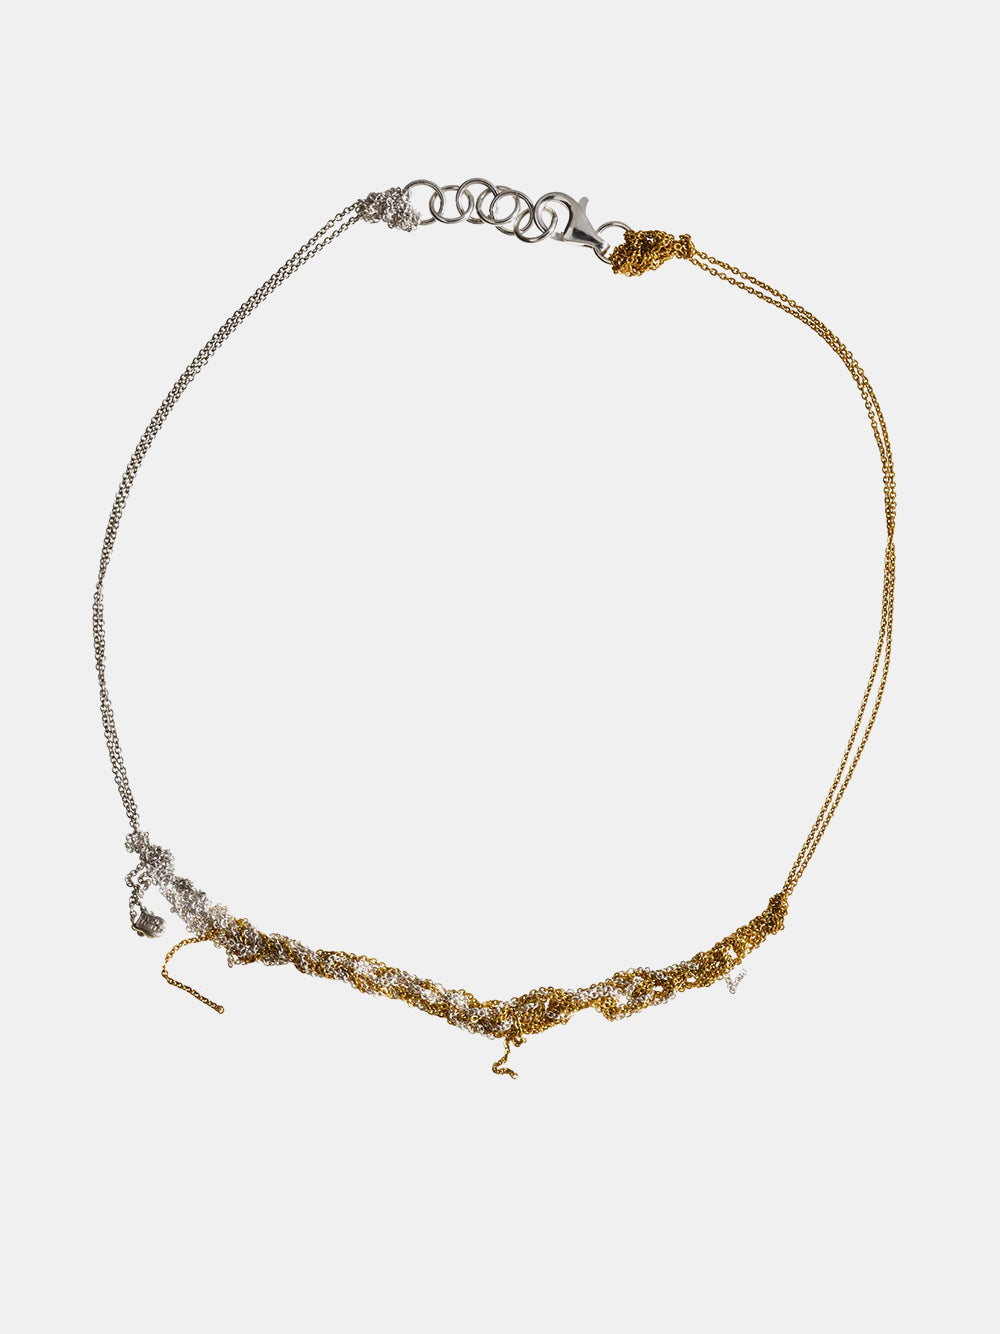 Arielle De Pinto 2-Tone Clasped Skinny Necklace in Gold and Silver